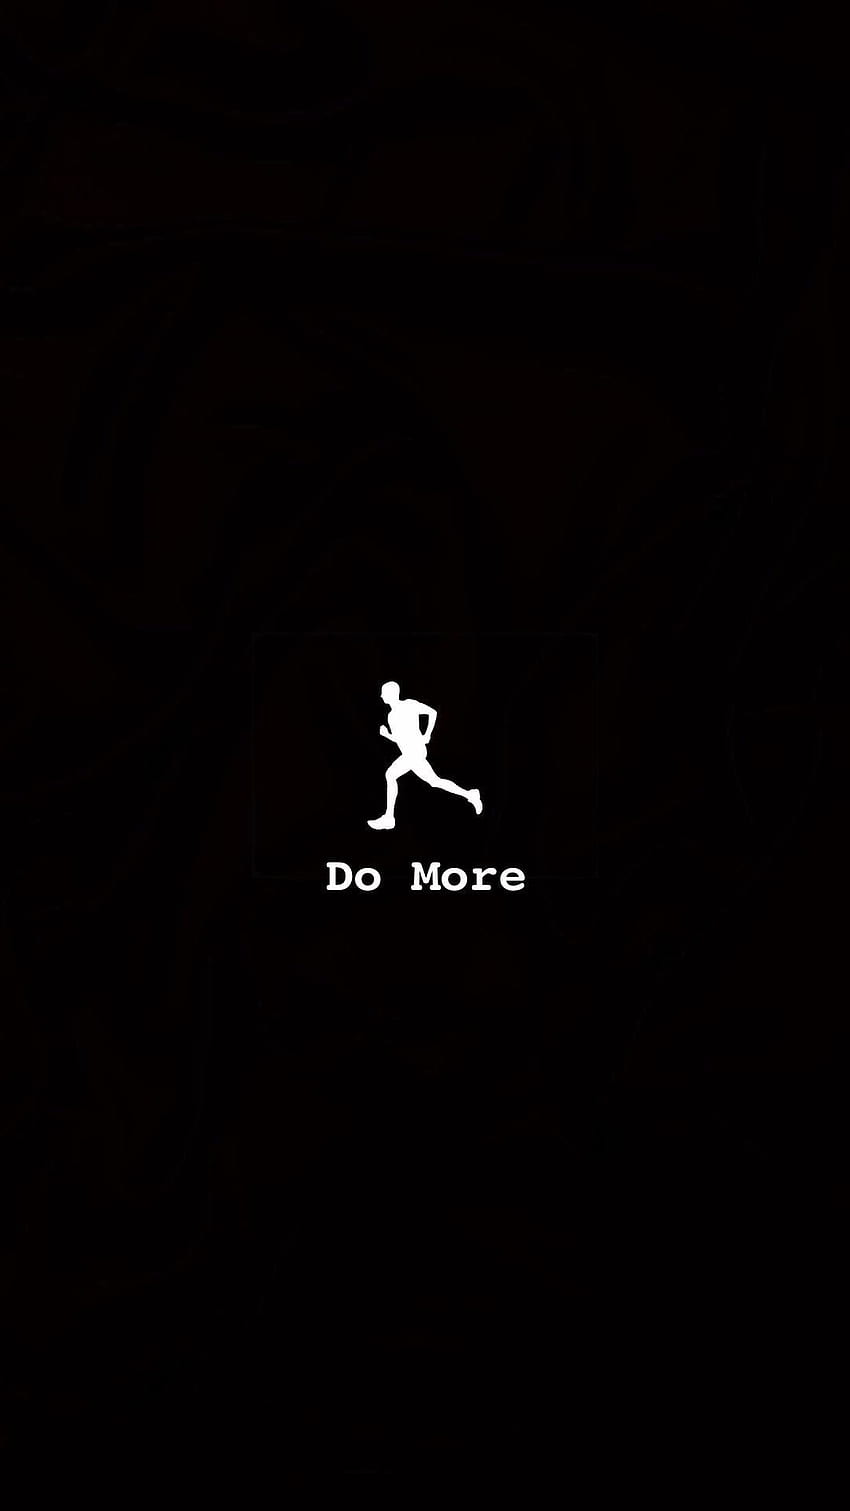 A simplistic Do More inspired by Casey's awesome Nike Ad from a few years ago. /ZwYy4scOJi8 : caseyneistat HD phone wallpaper